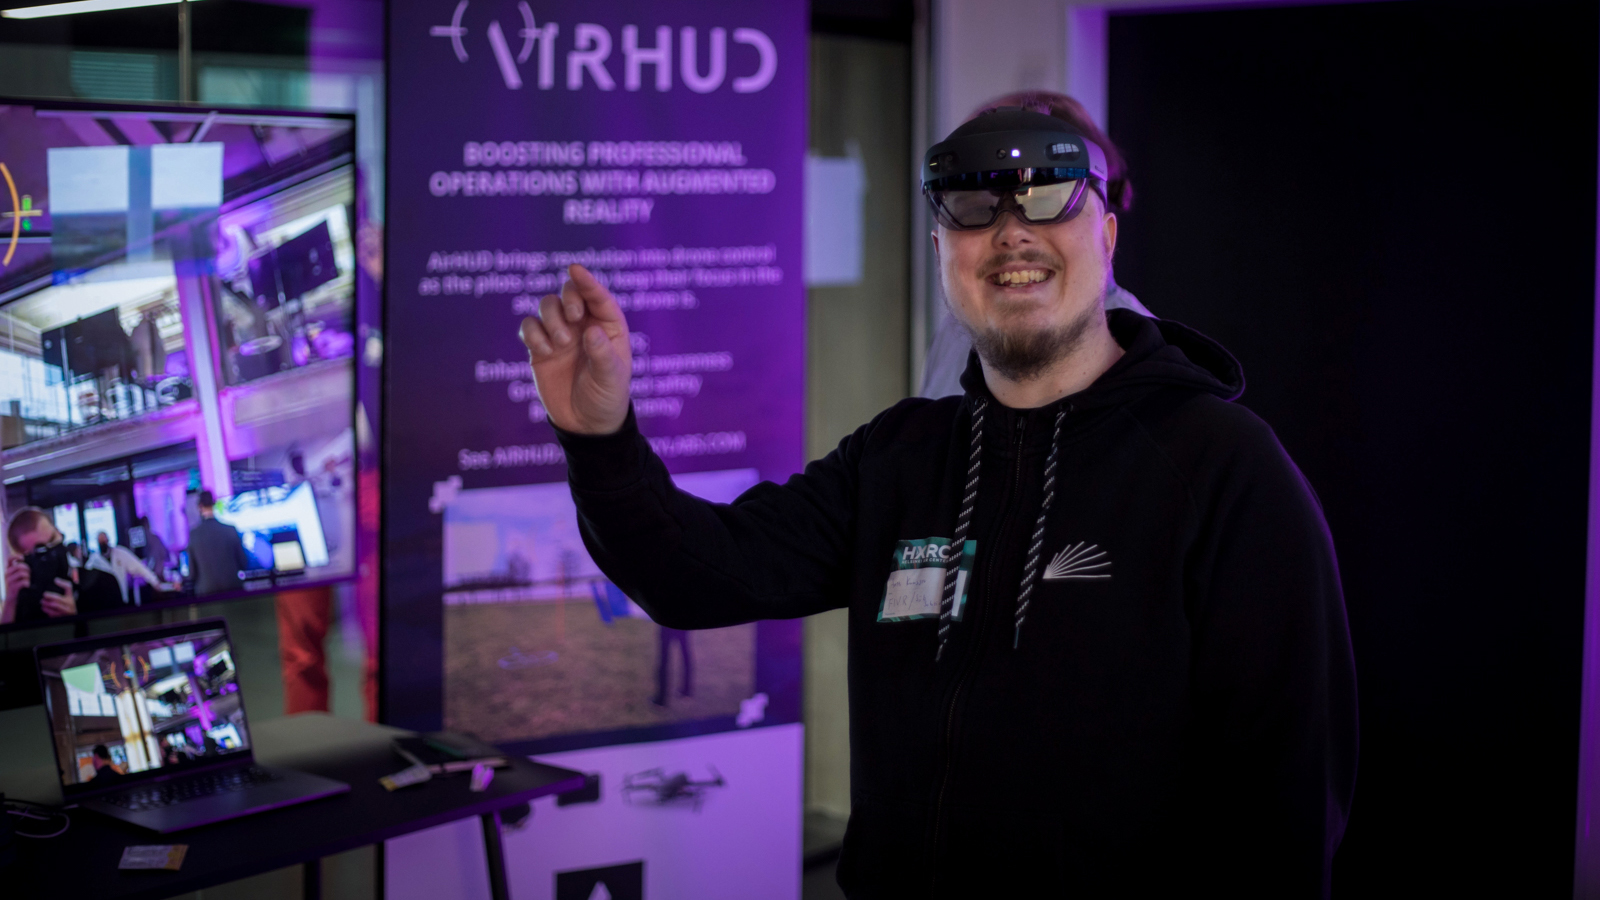 A person using the Hololens headset and smiling.